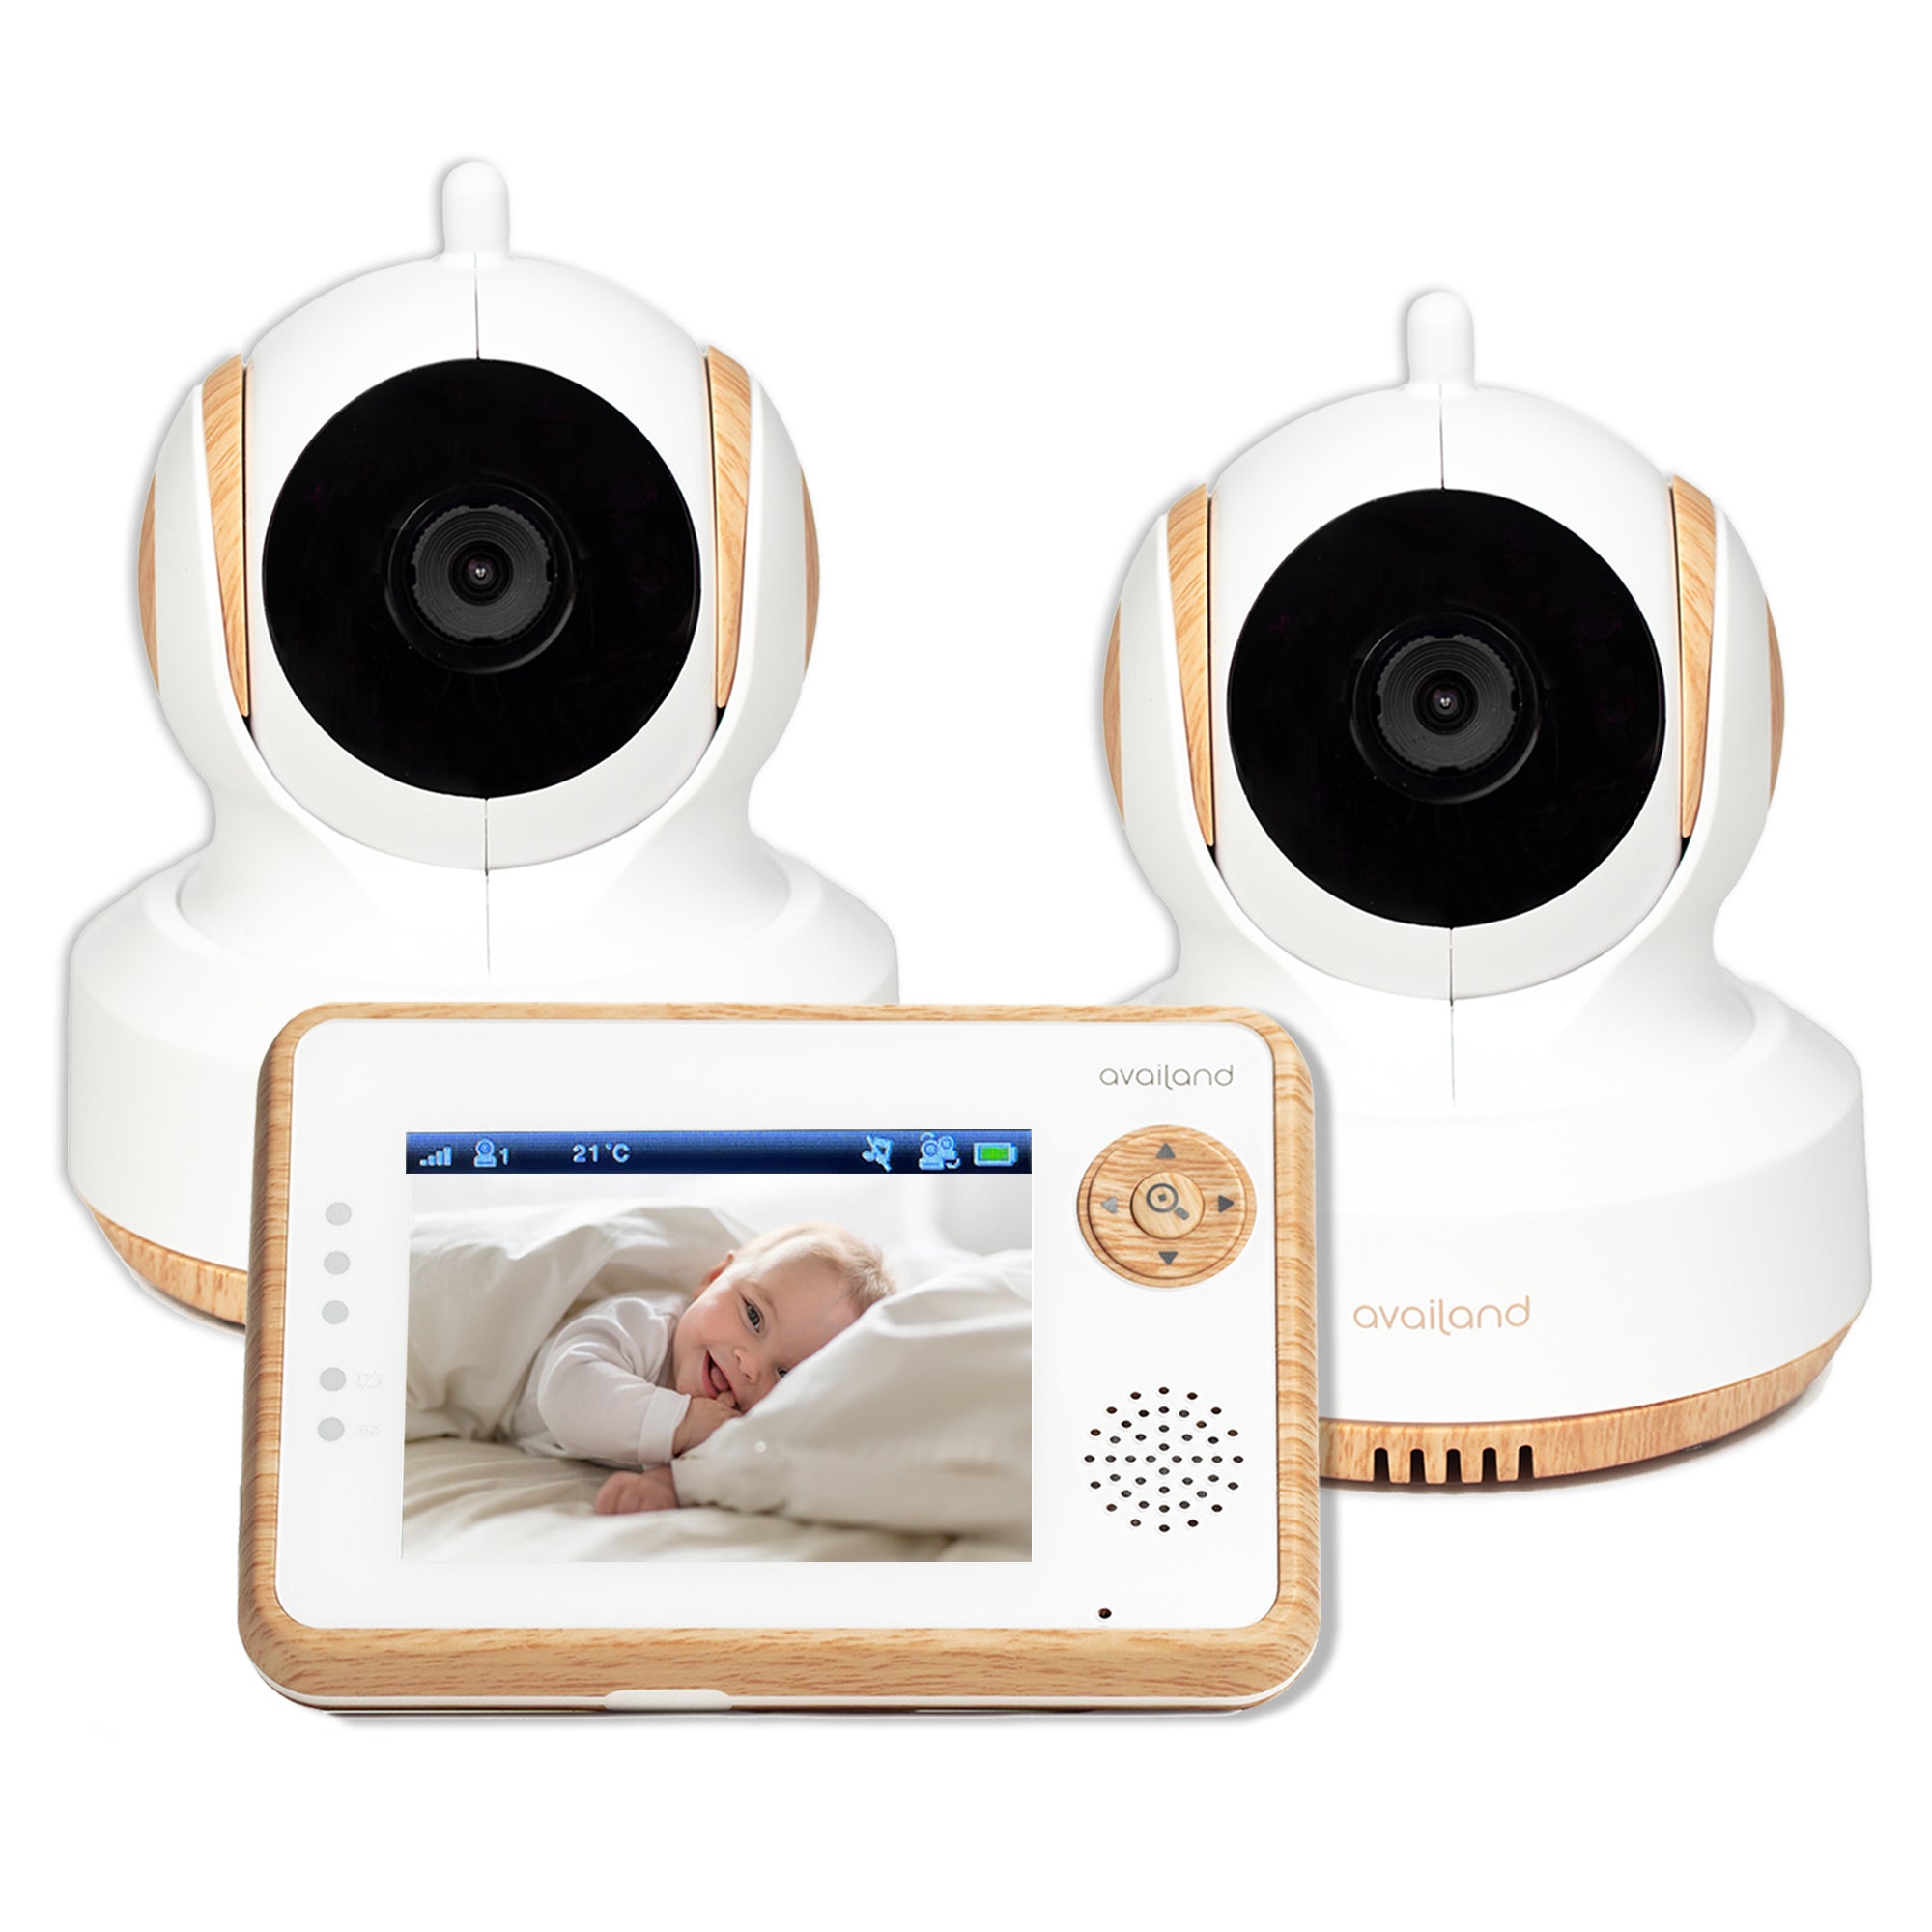 Availand Follow Baby Wooden Edition Baby Monitor 2 Cameras 